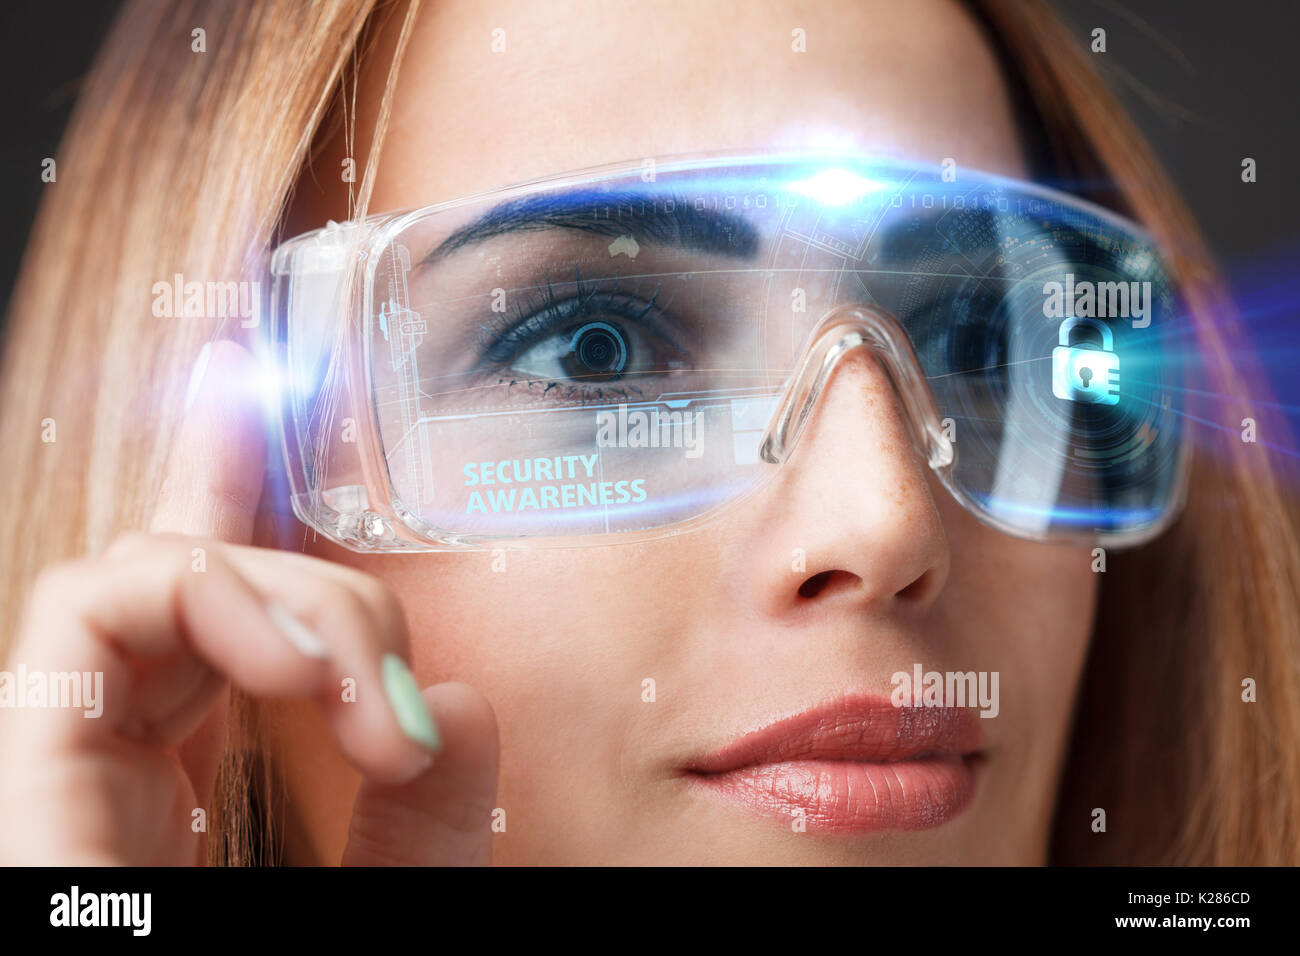 Business, Technology, Internet and network concept. Technology future. Young businesswoman working in virtual glasses, select the icon Security Awaren Stock Photo